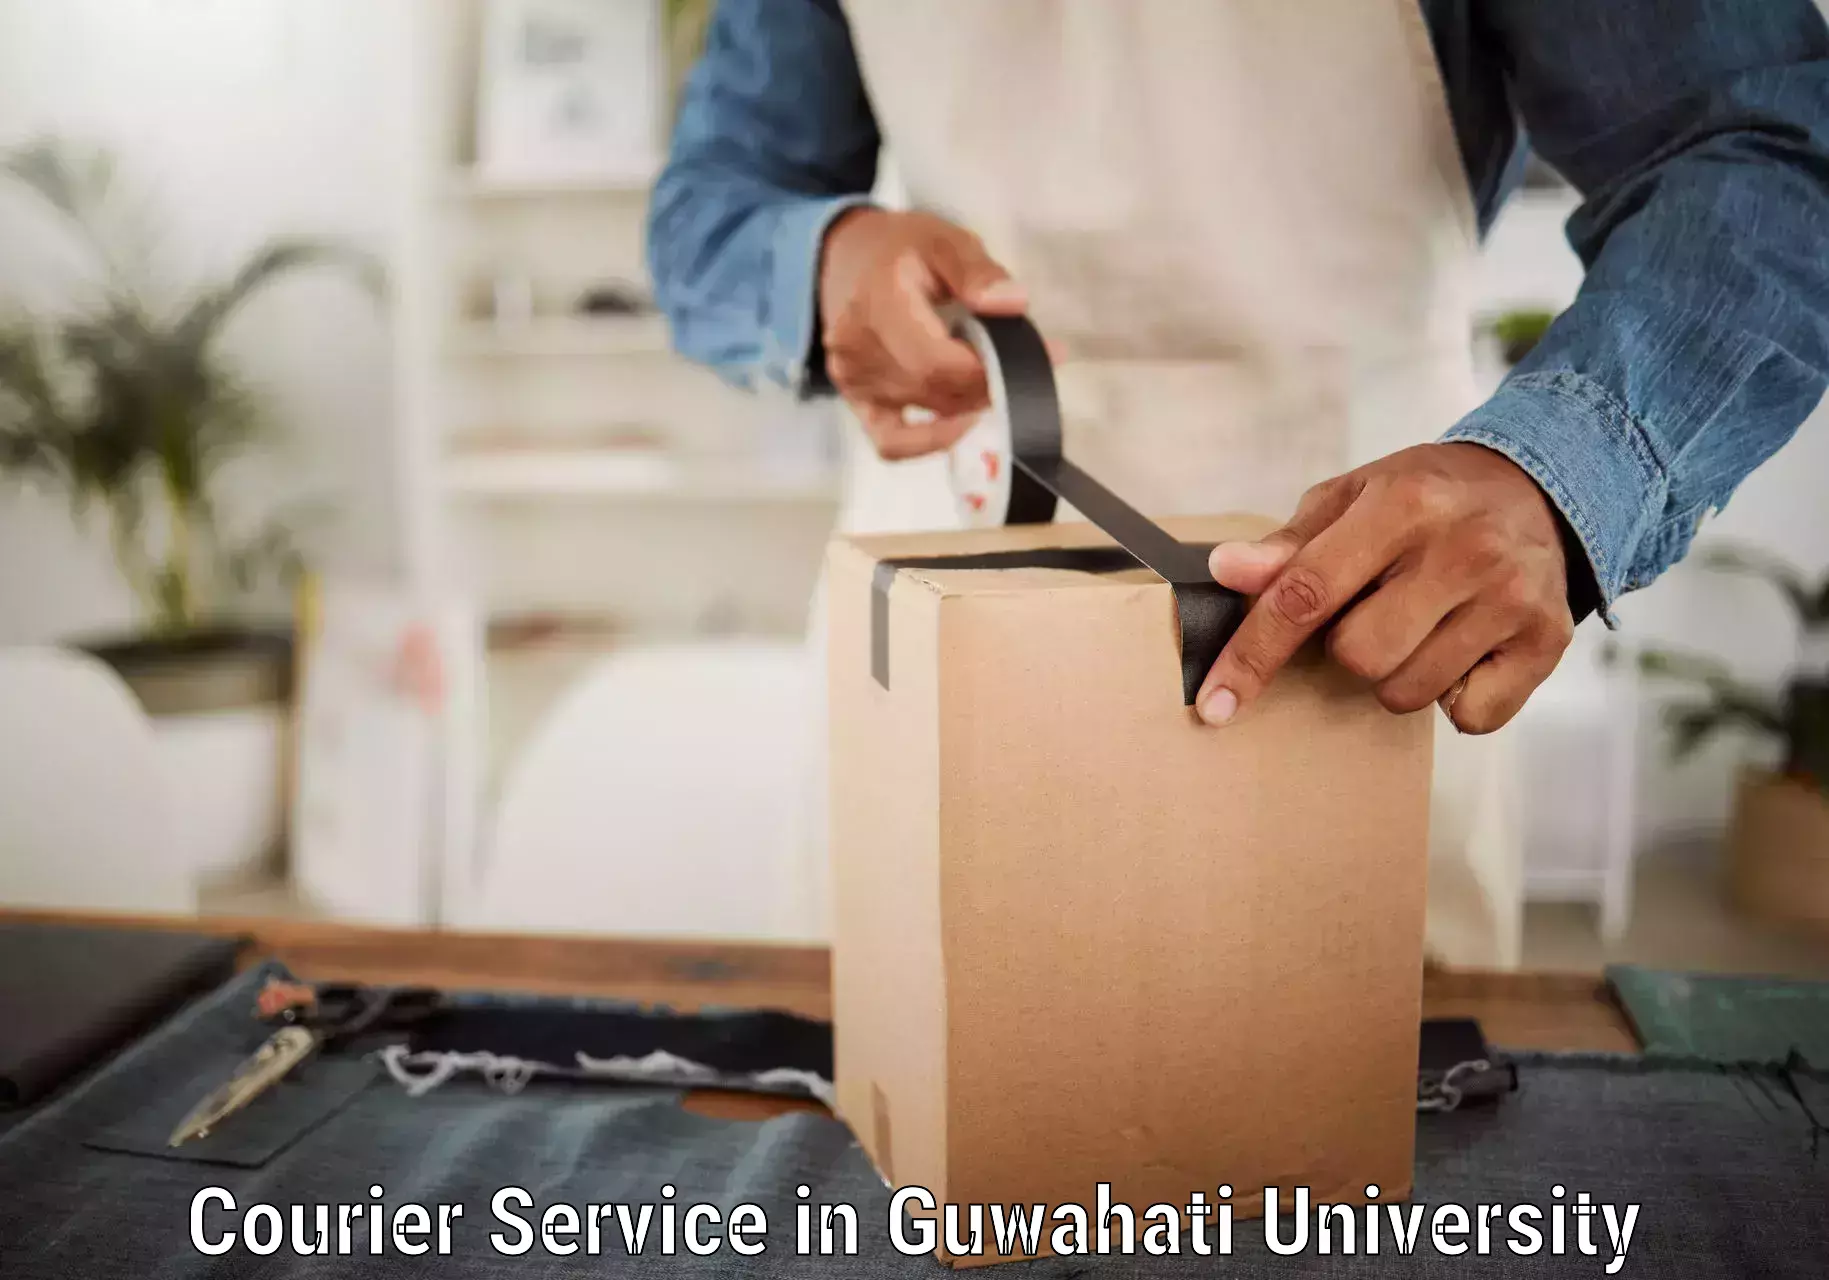 Customer-oriented courier services in Guwahati University